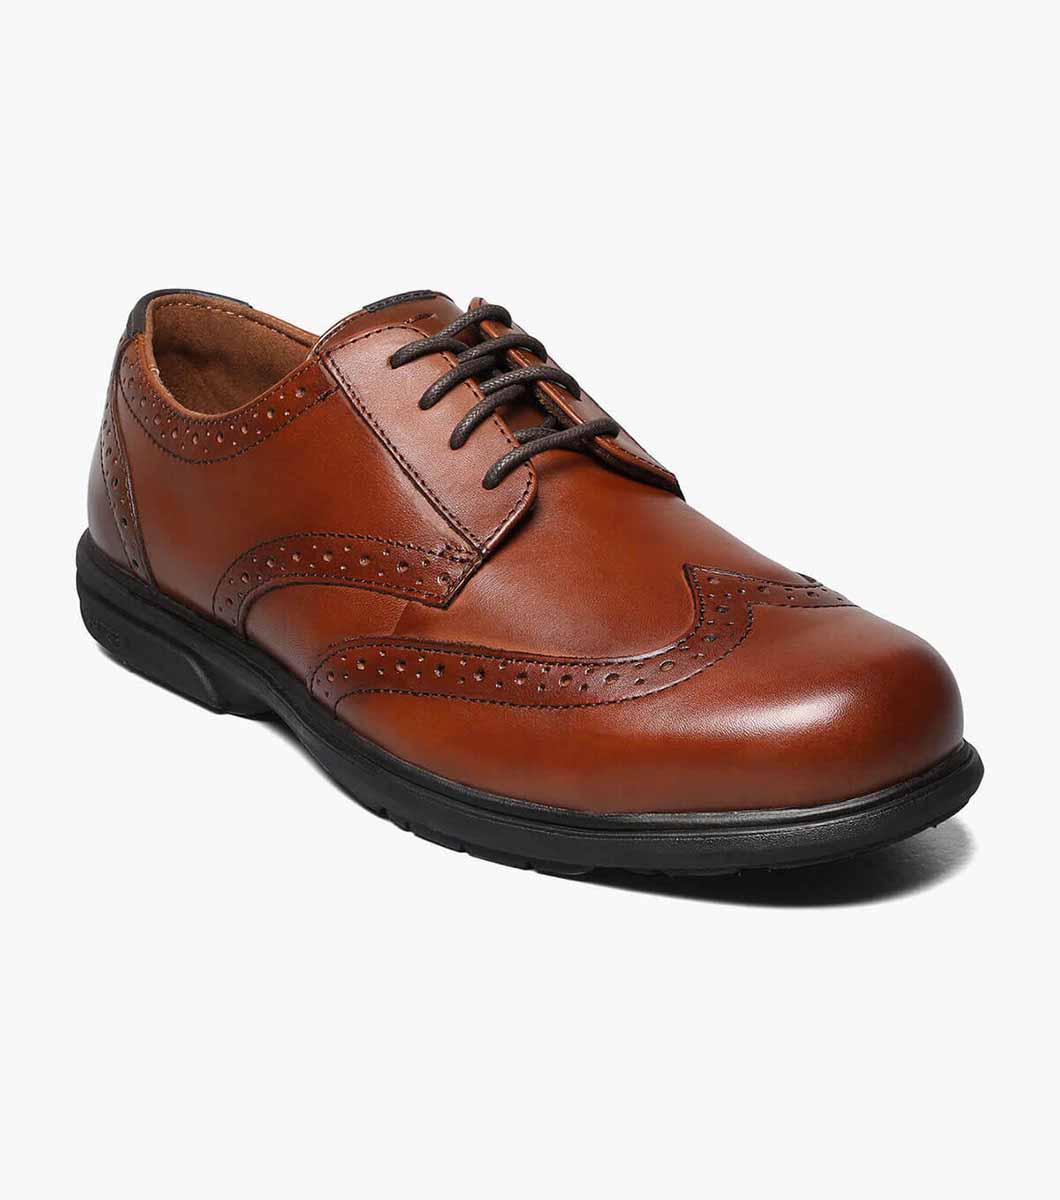 Top Recommendations for Stylish Steel Toe Dress Shoes